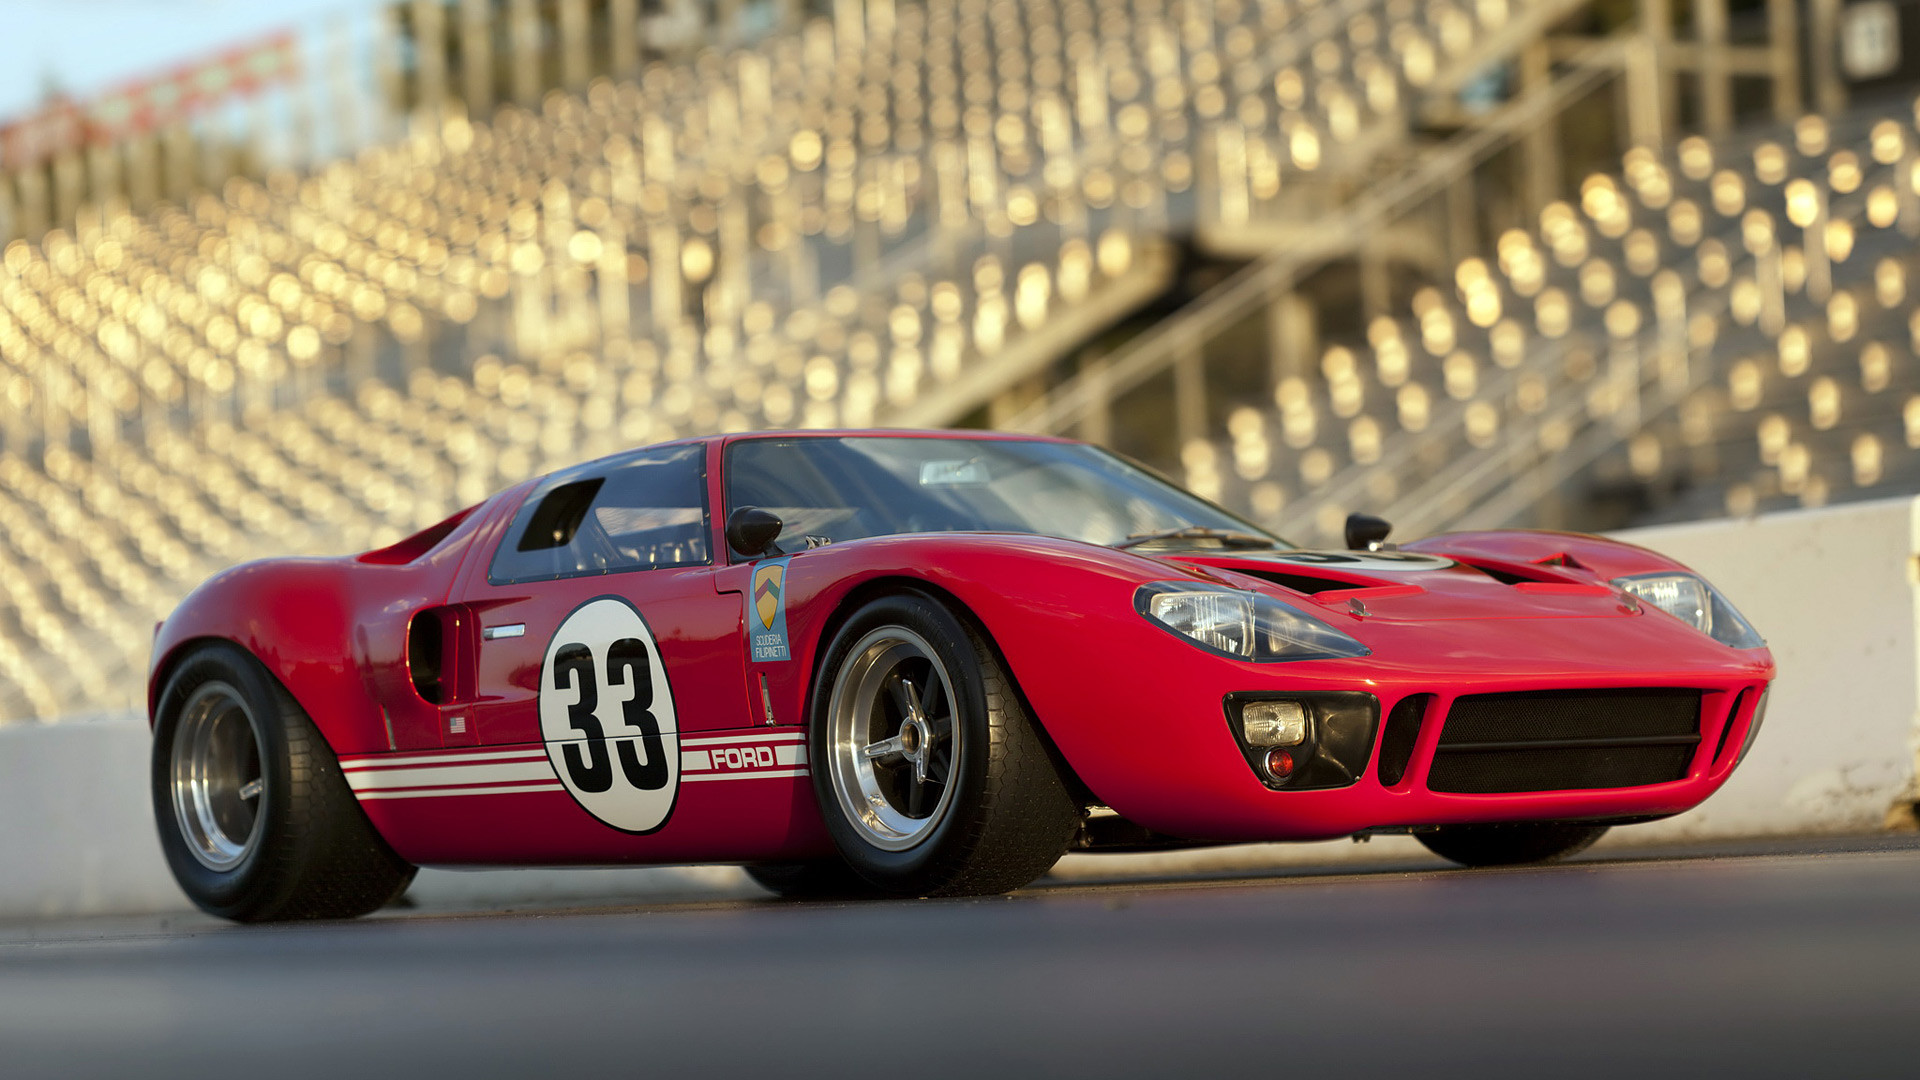 1920x1080 1966 Ford GT40 picture.